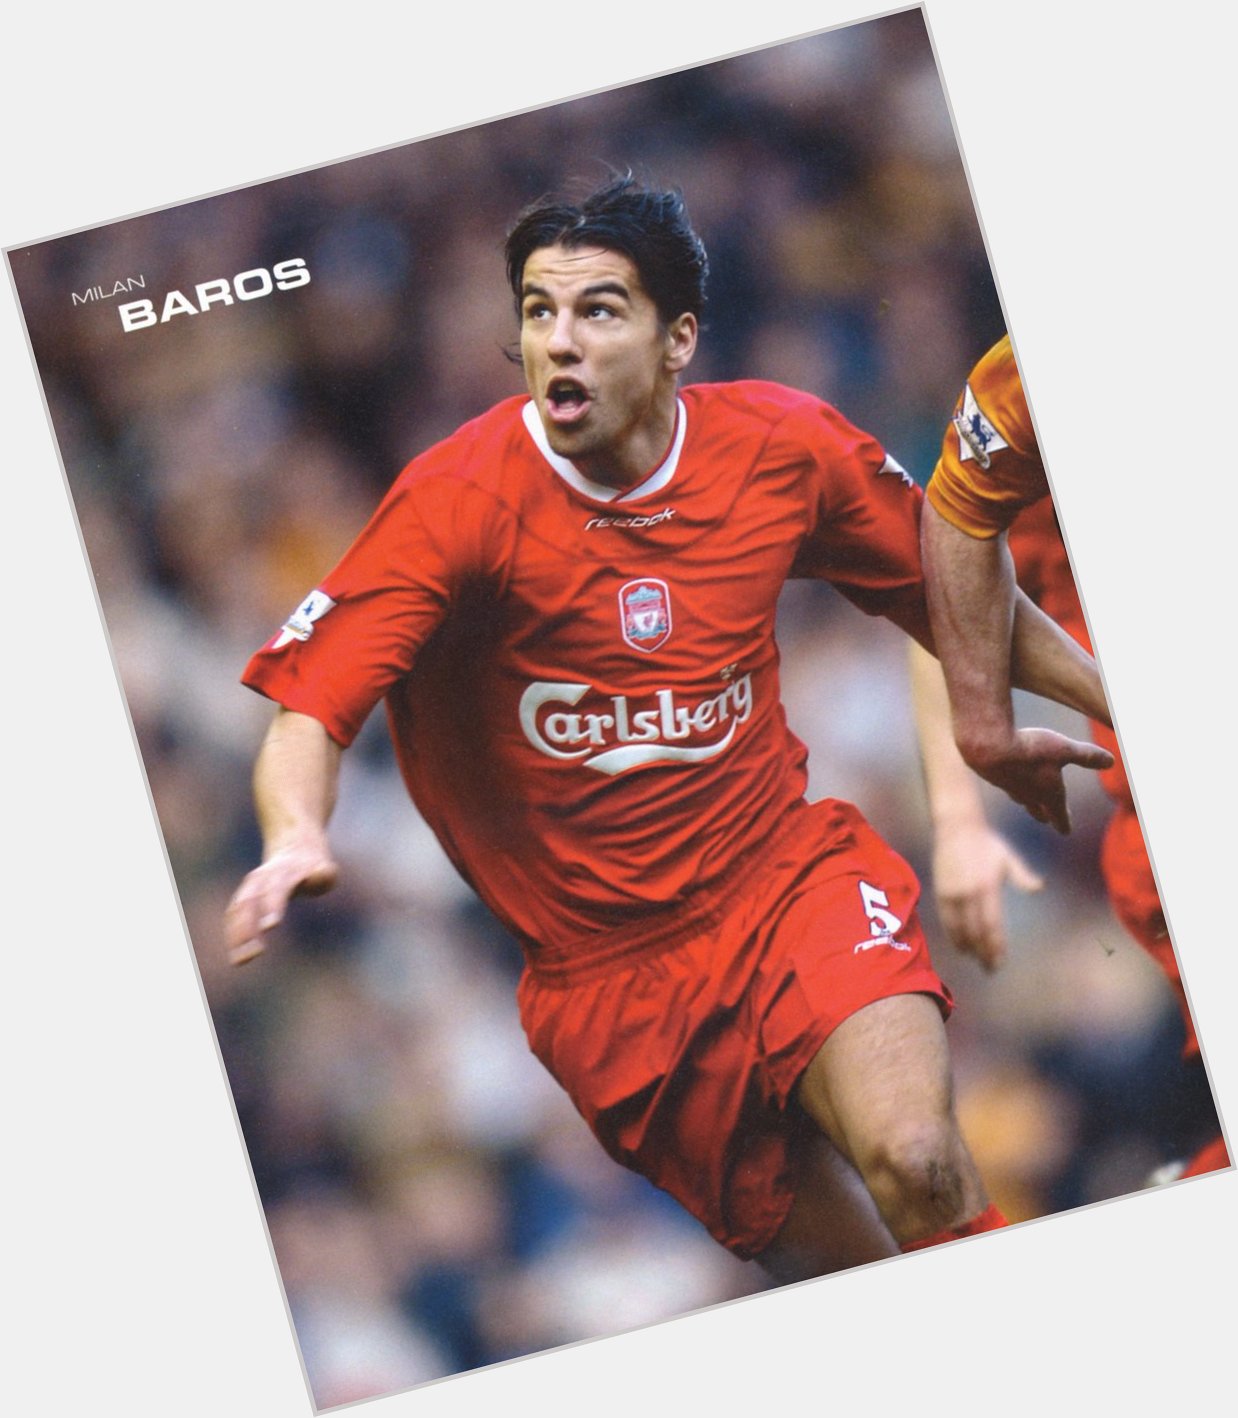 Happy 34th birthday to Milan Baros. 27 goals in 66 starts for 